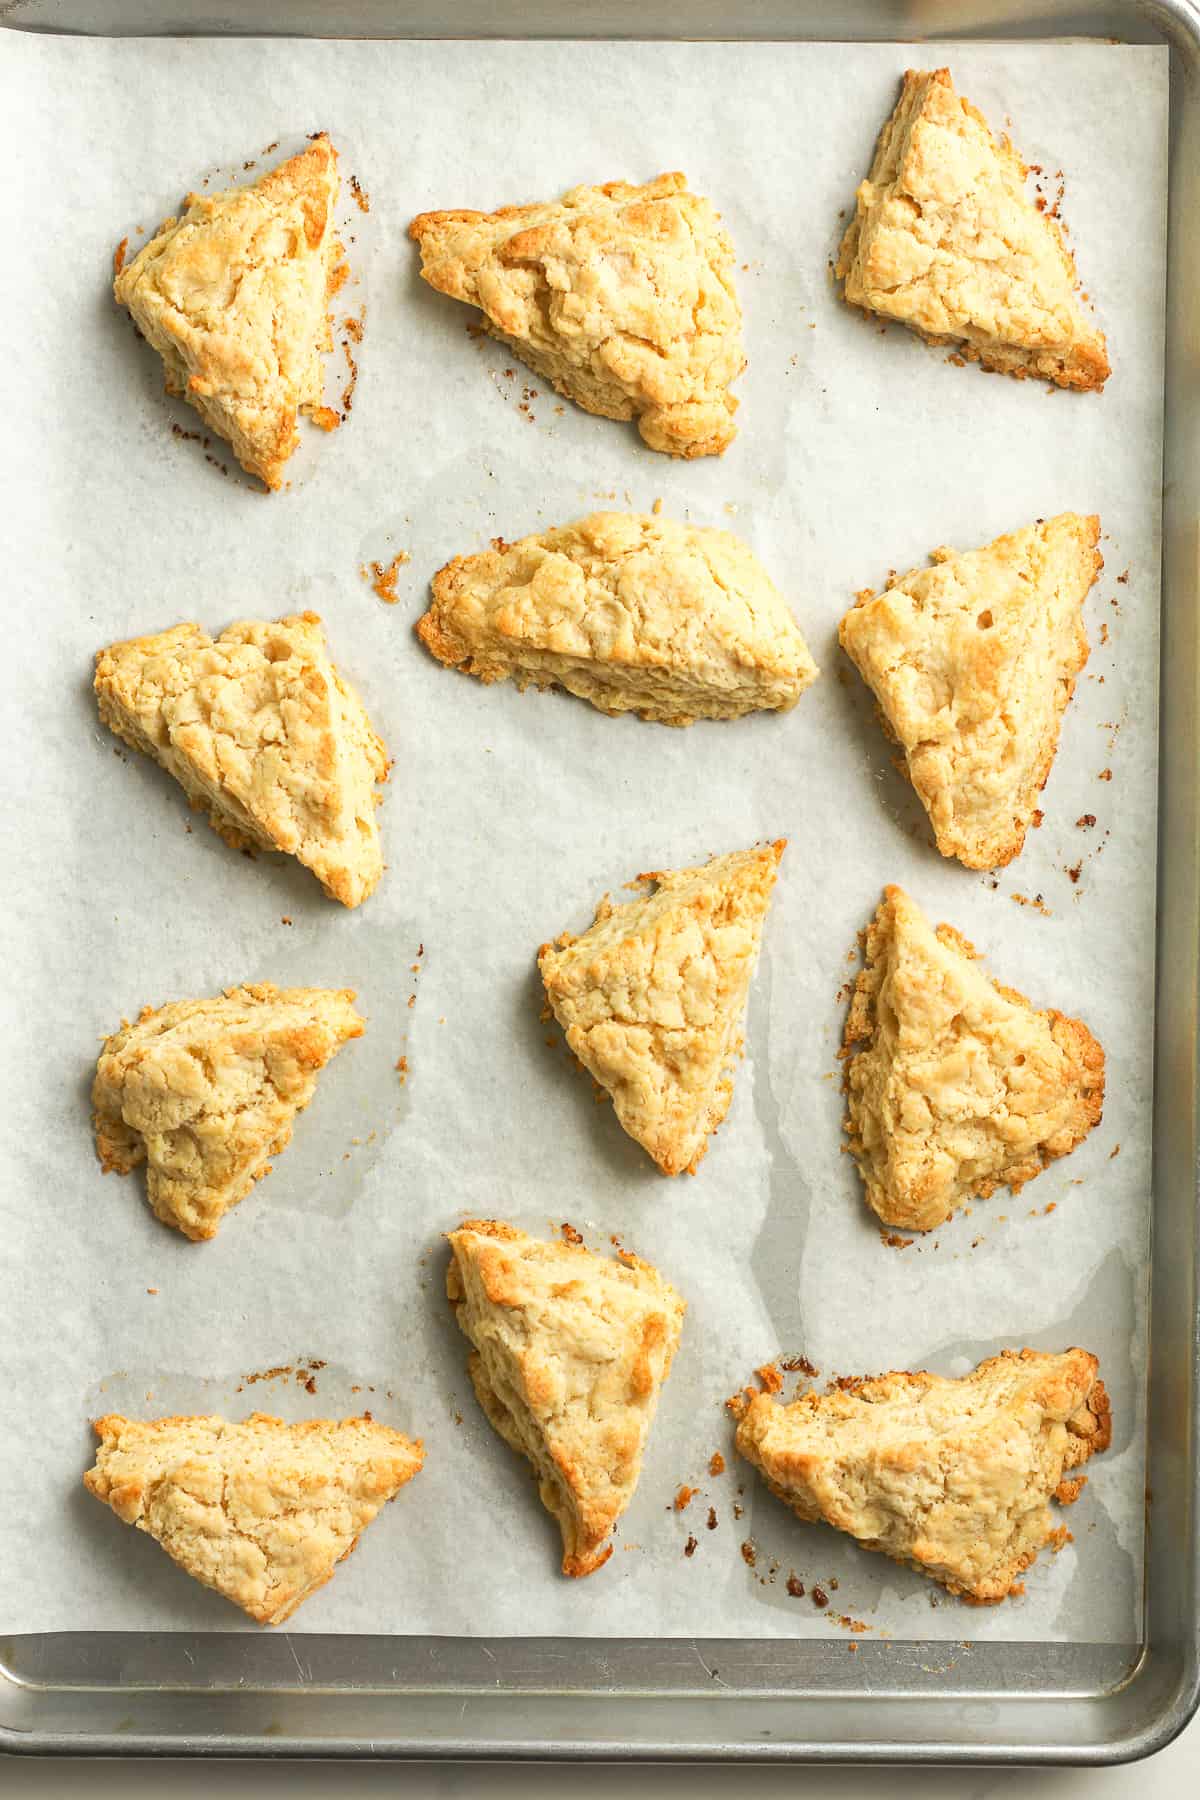 The baked scones on a baking sheet.